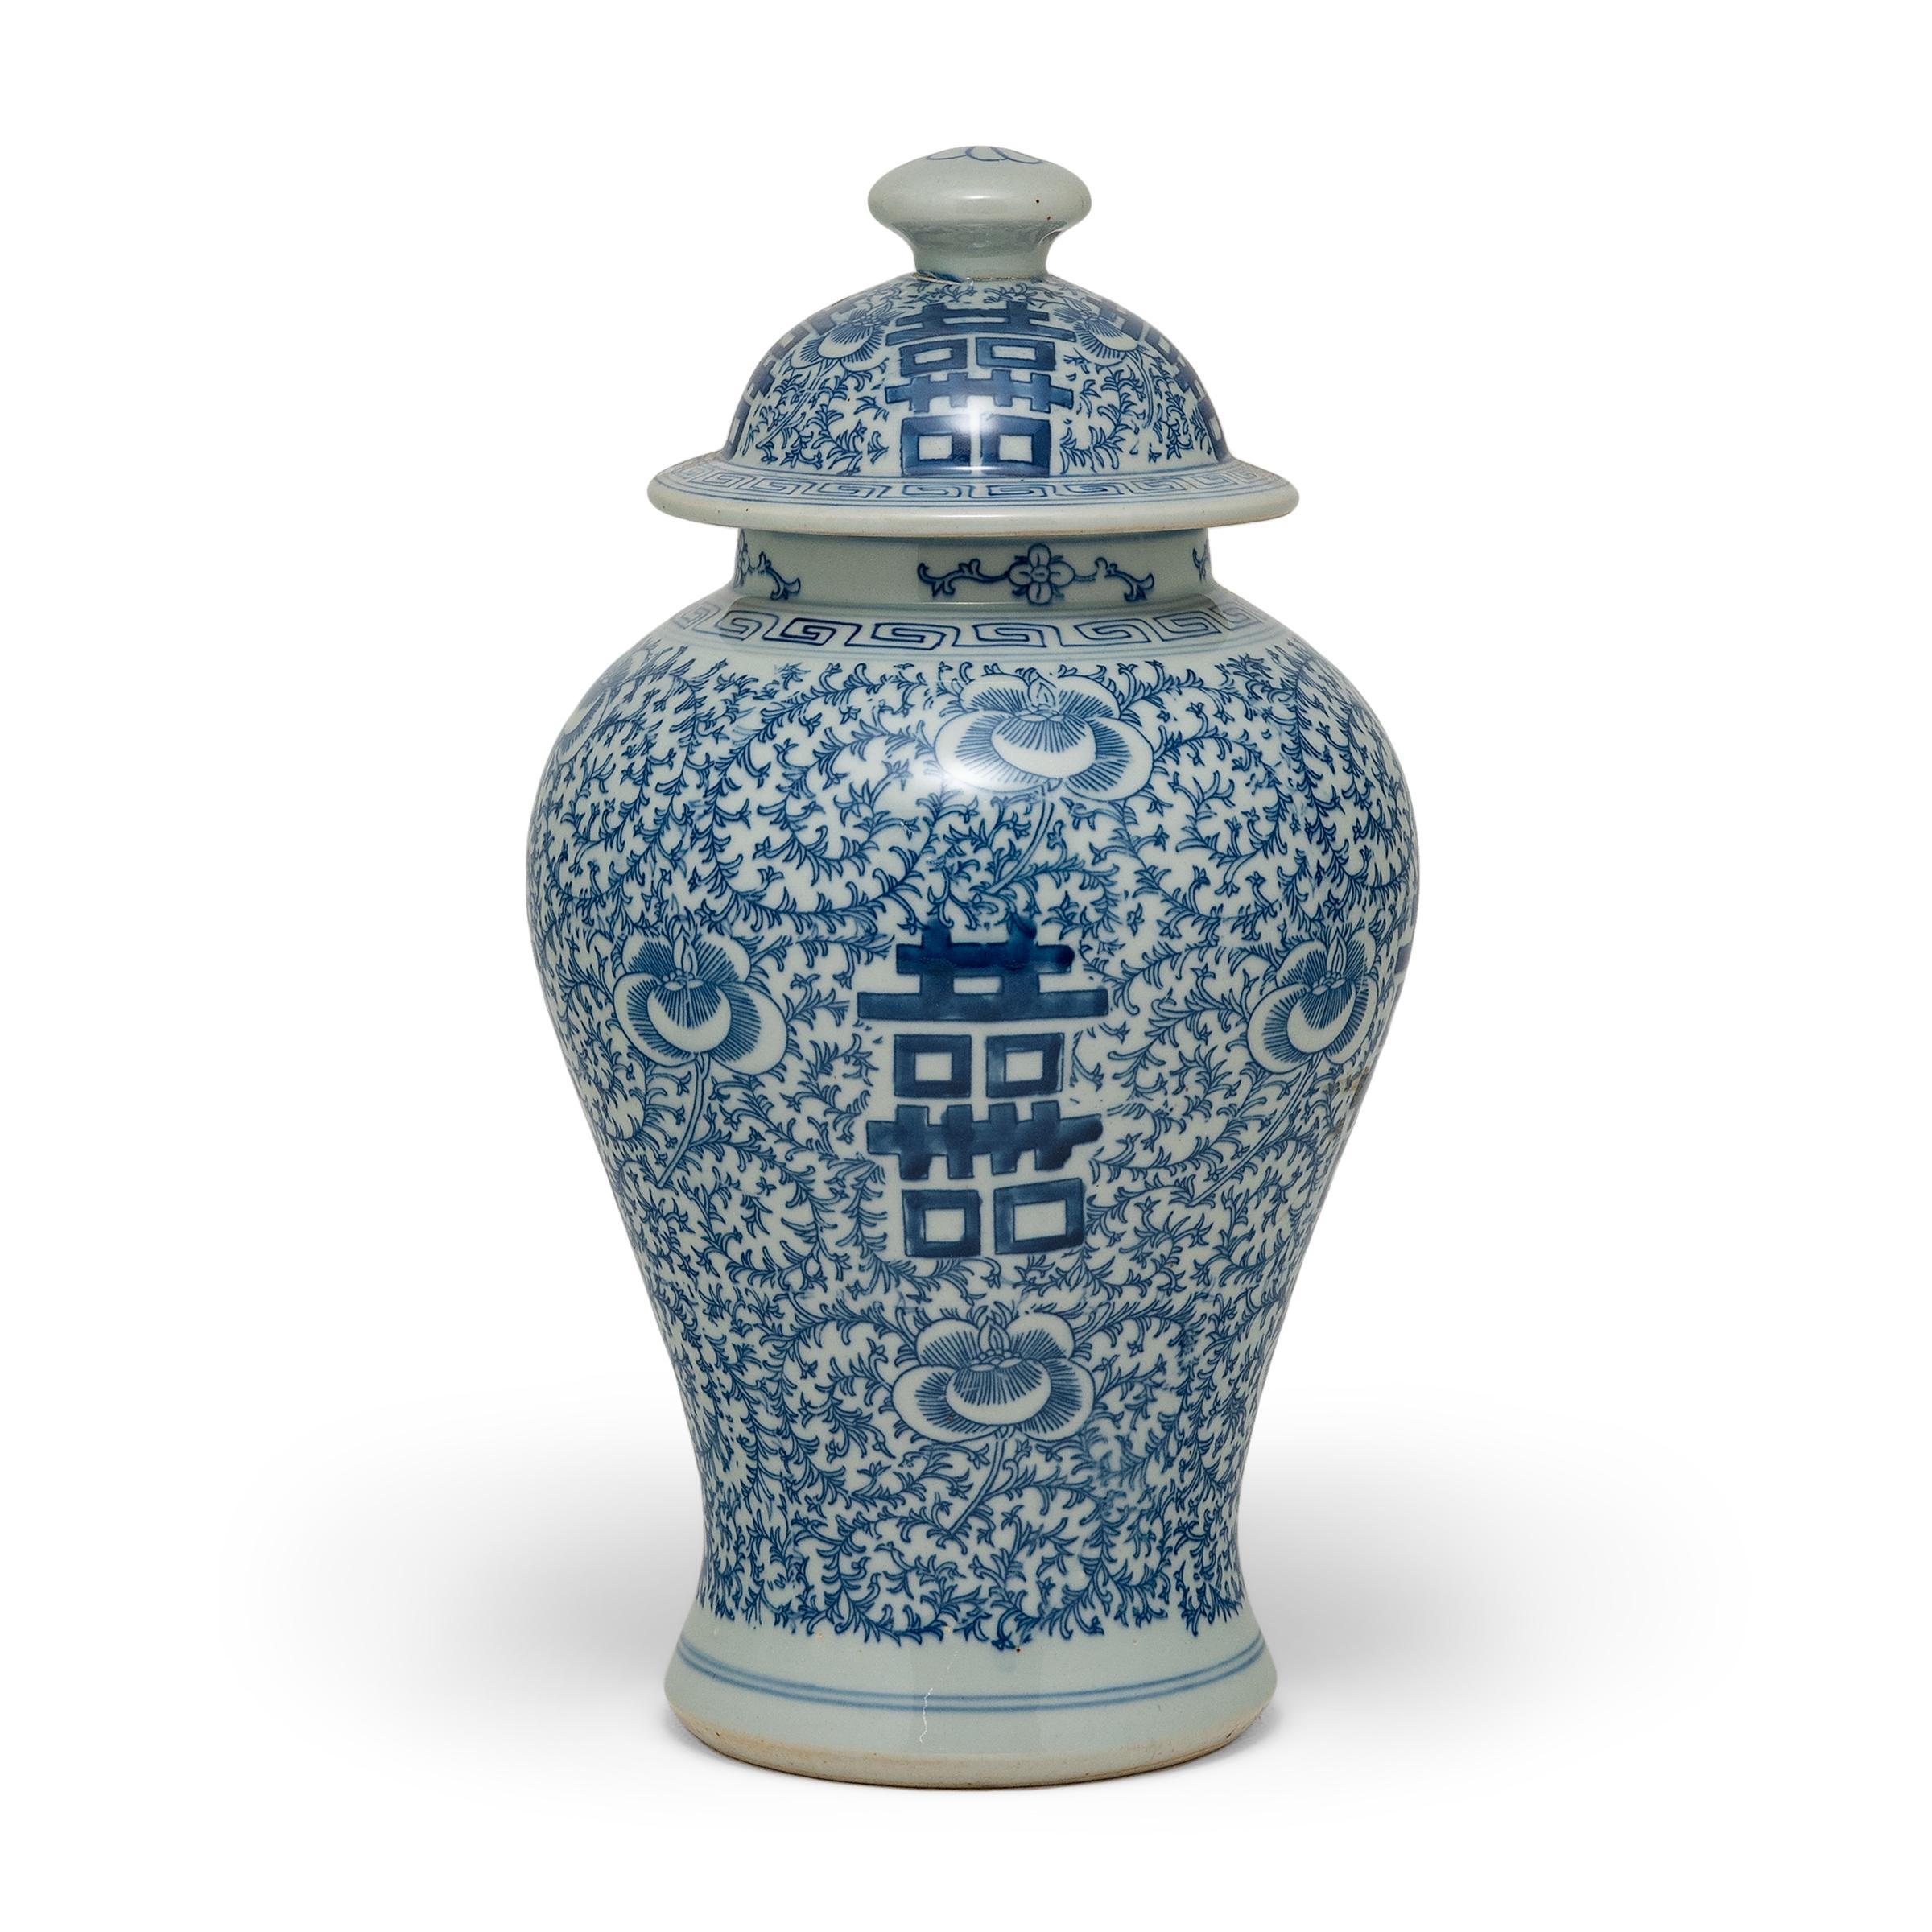 The symbol for double happiness adorns this slender ginger jar with best wishes for love, companionship and marital bliss. Glazed in the classic blue and white manner, the porcelain ginger jar has a classic form with rounded shoulders that taper to